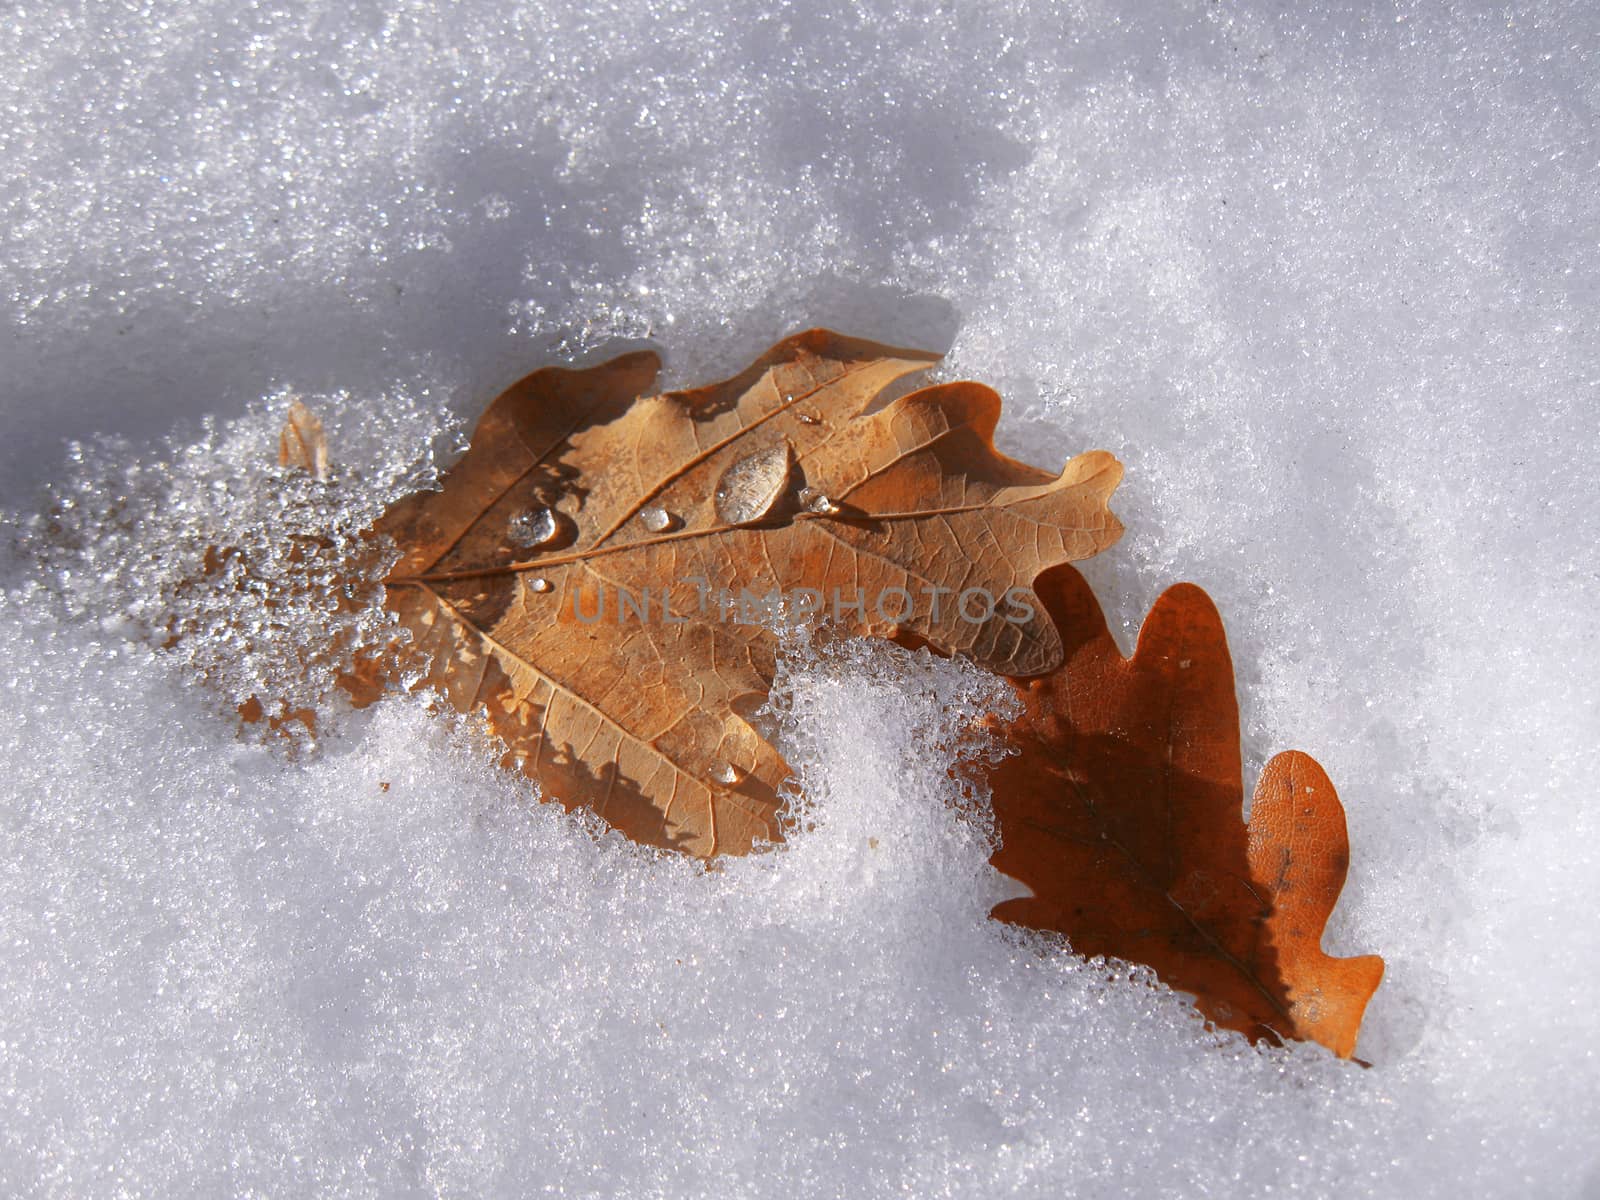 Frozen oak leaves laying in the snow